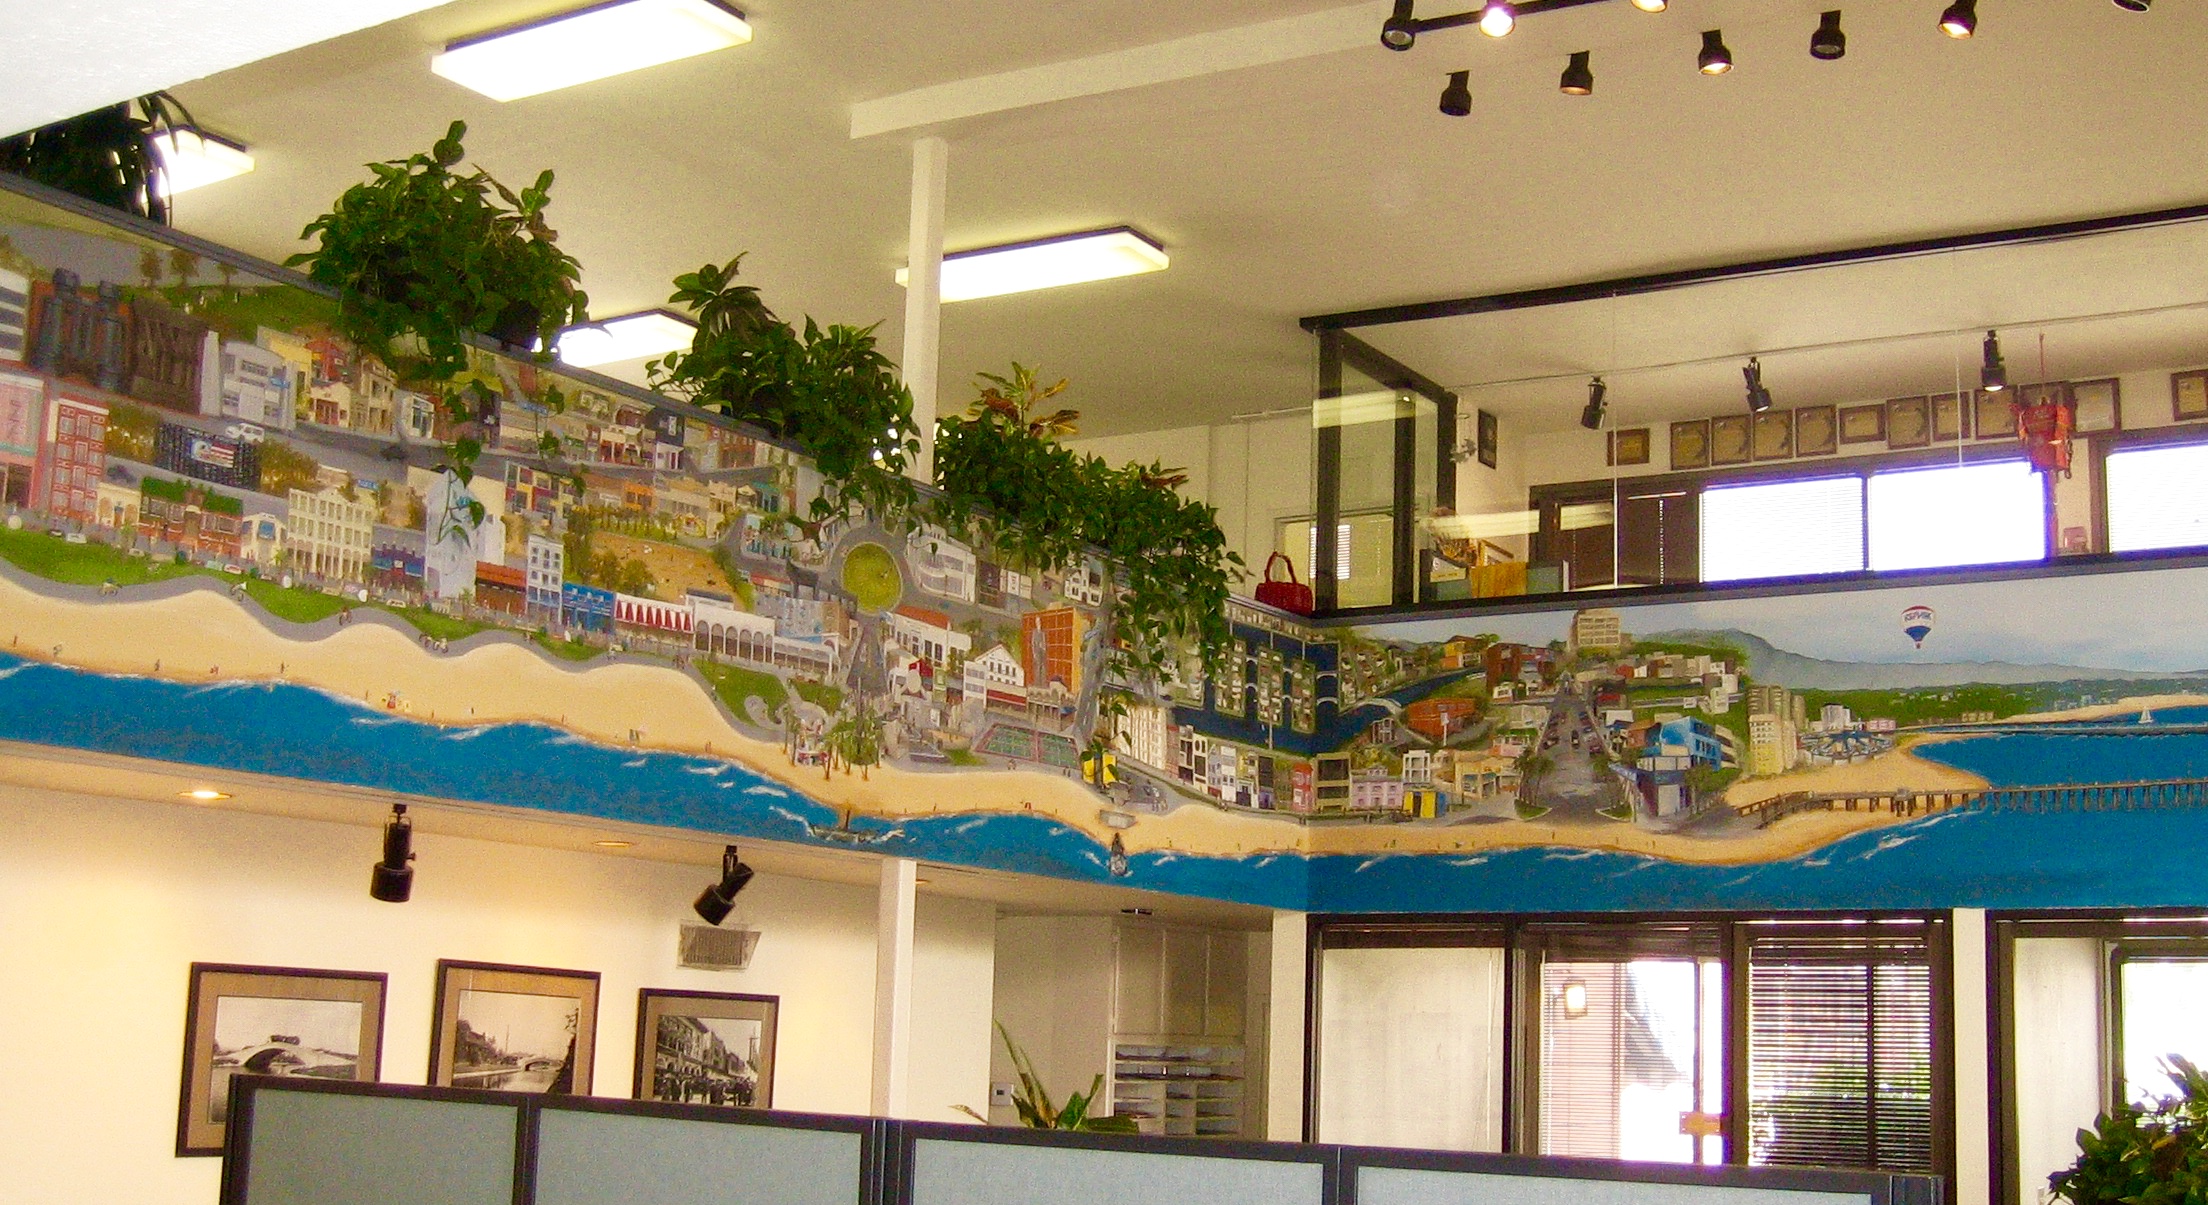 Mural of Venice, CA in RE/MAX Realty Office